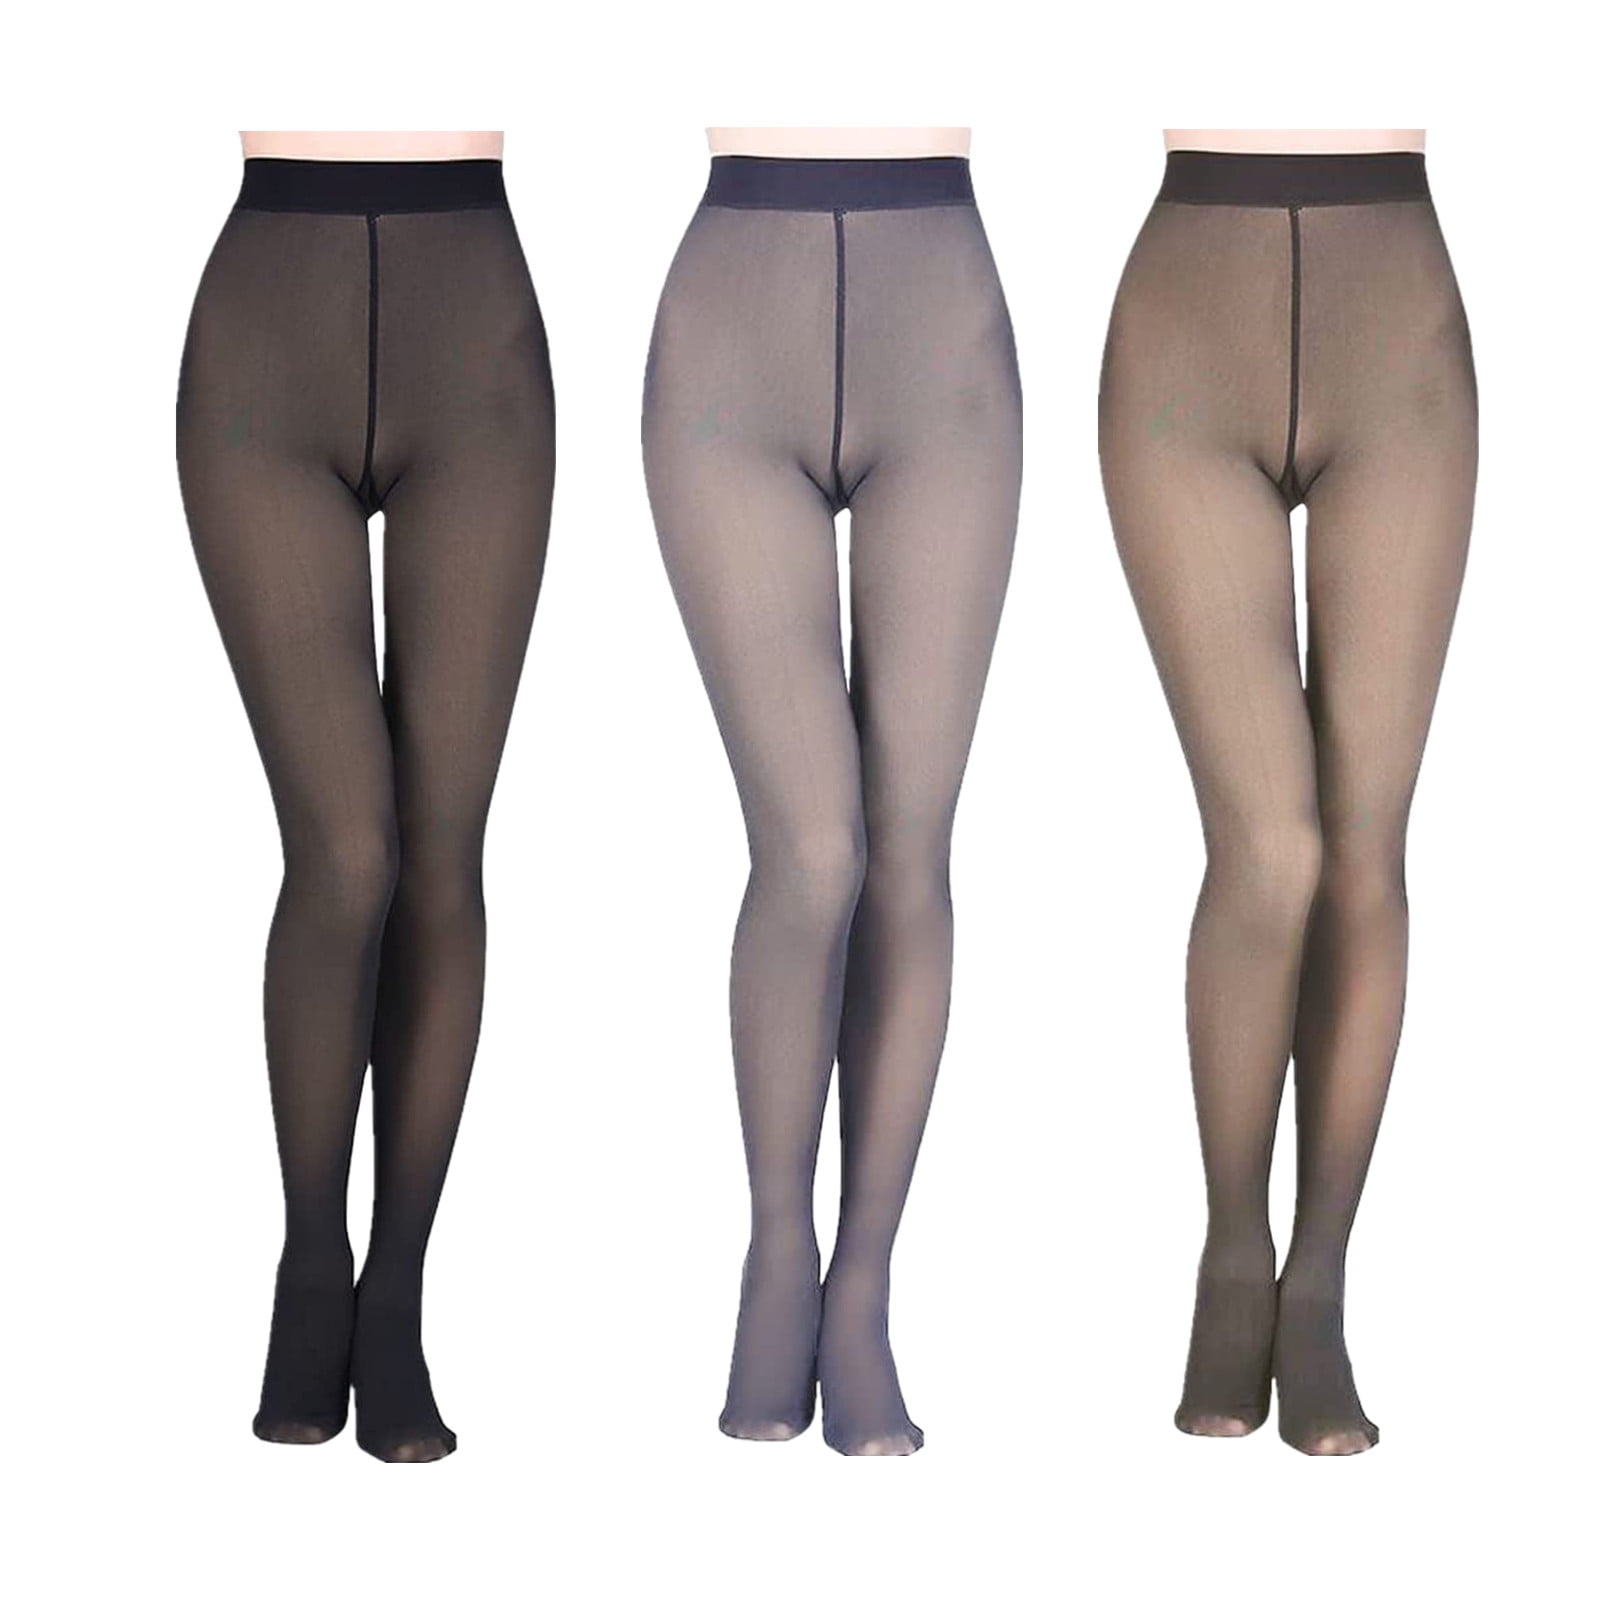 Fleece Lined Tights Women Leggings Thermal Pantyhose Fake Translucent Tights  Opaque High Waisted Winter Warm Sheer Tight - AliExpress